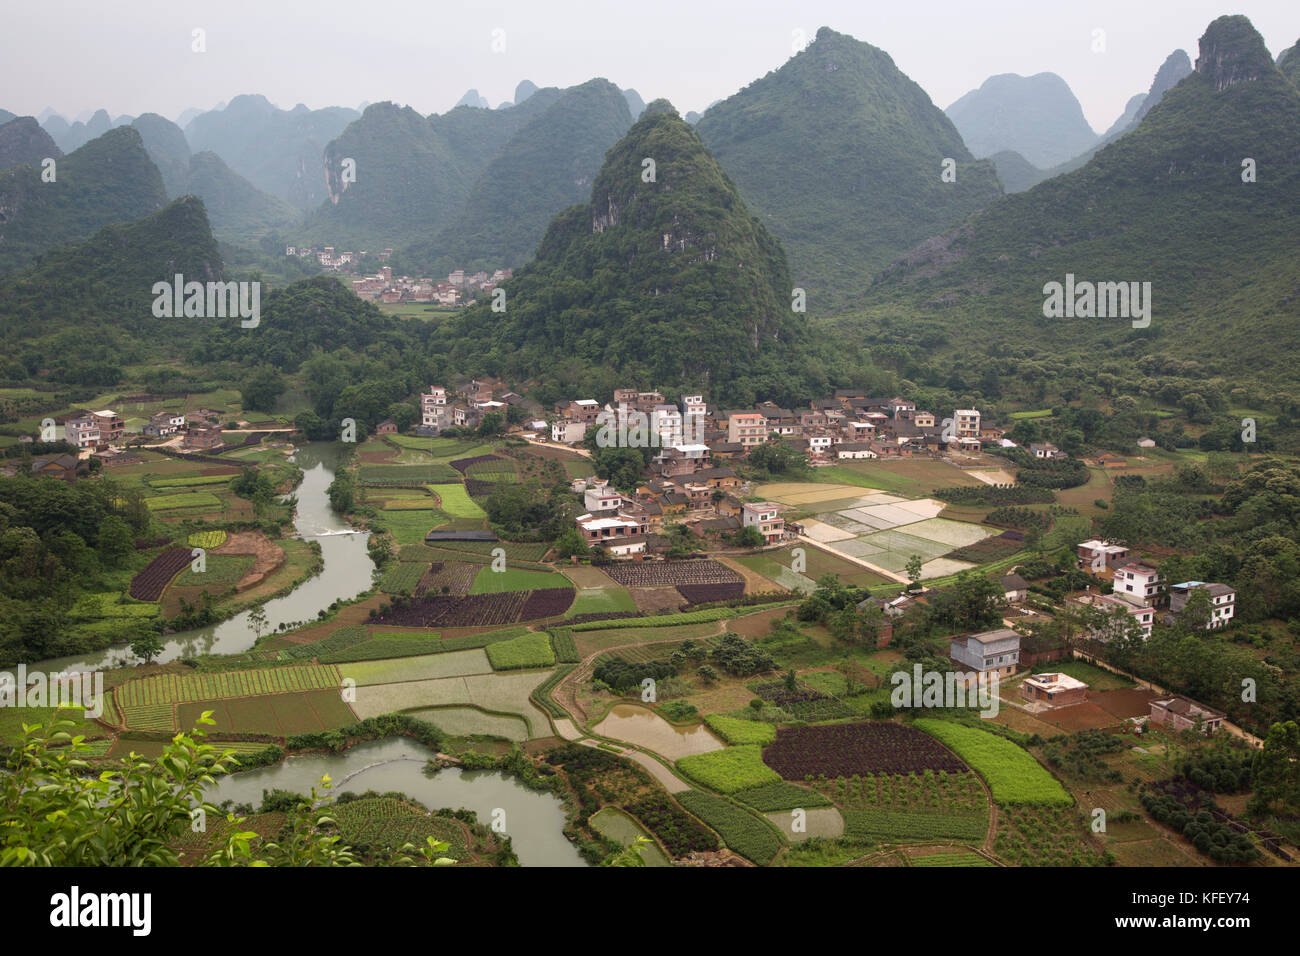 Rural landscape near the town of Yangshuo County of Guilin province in China Stock Photo